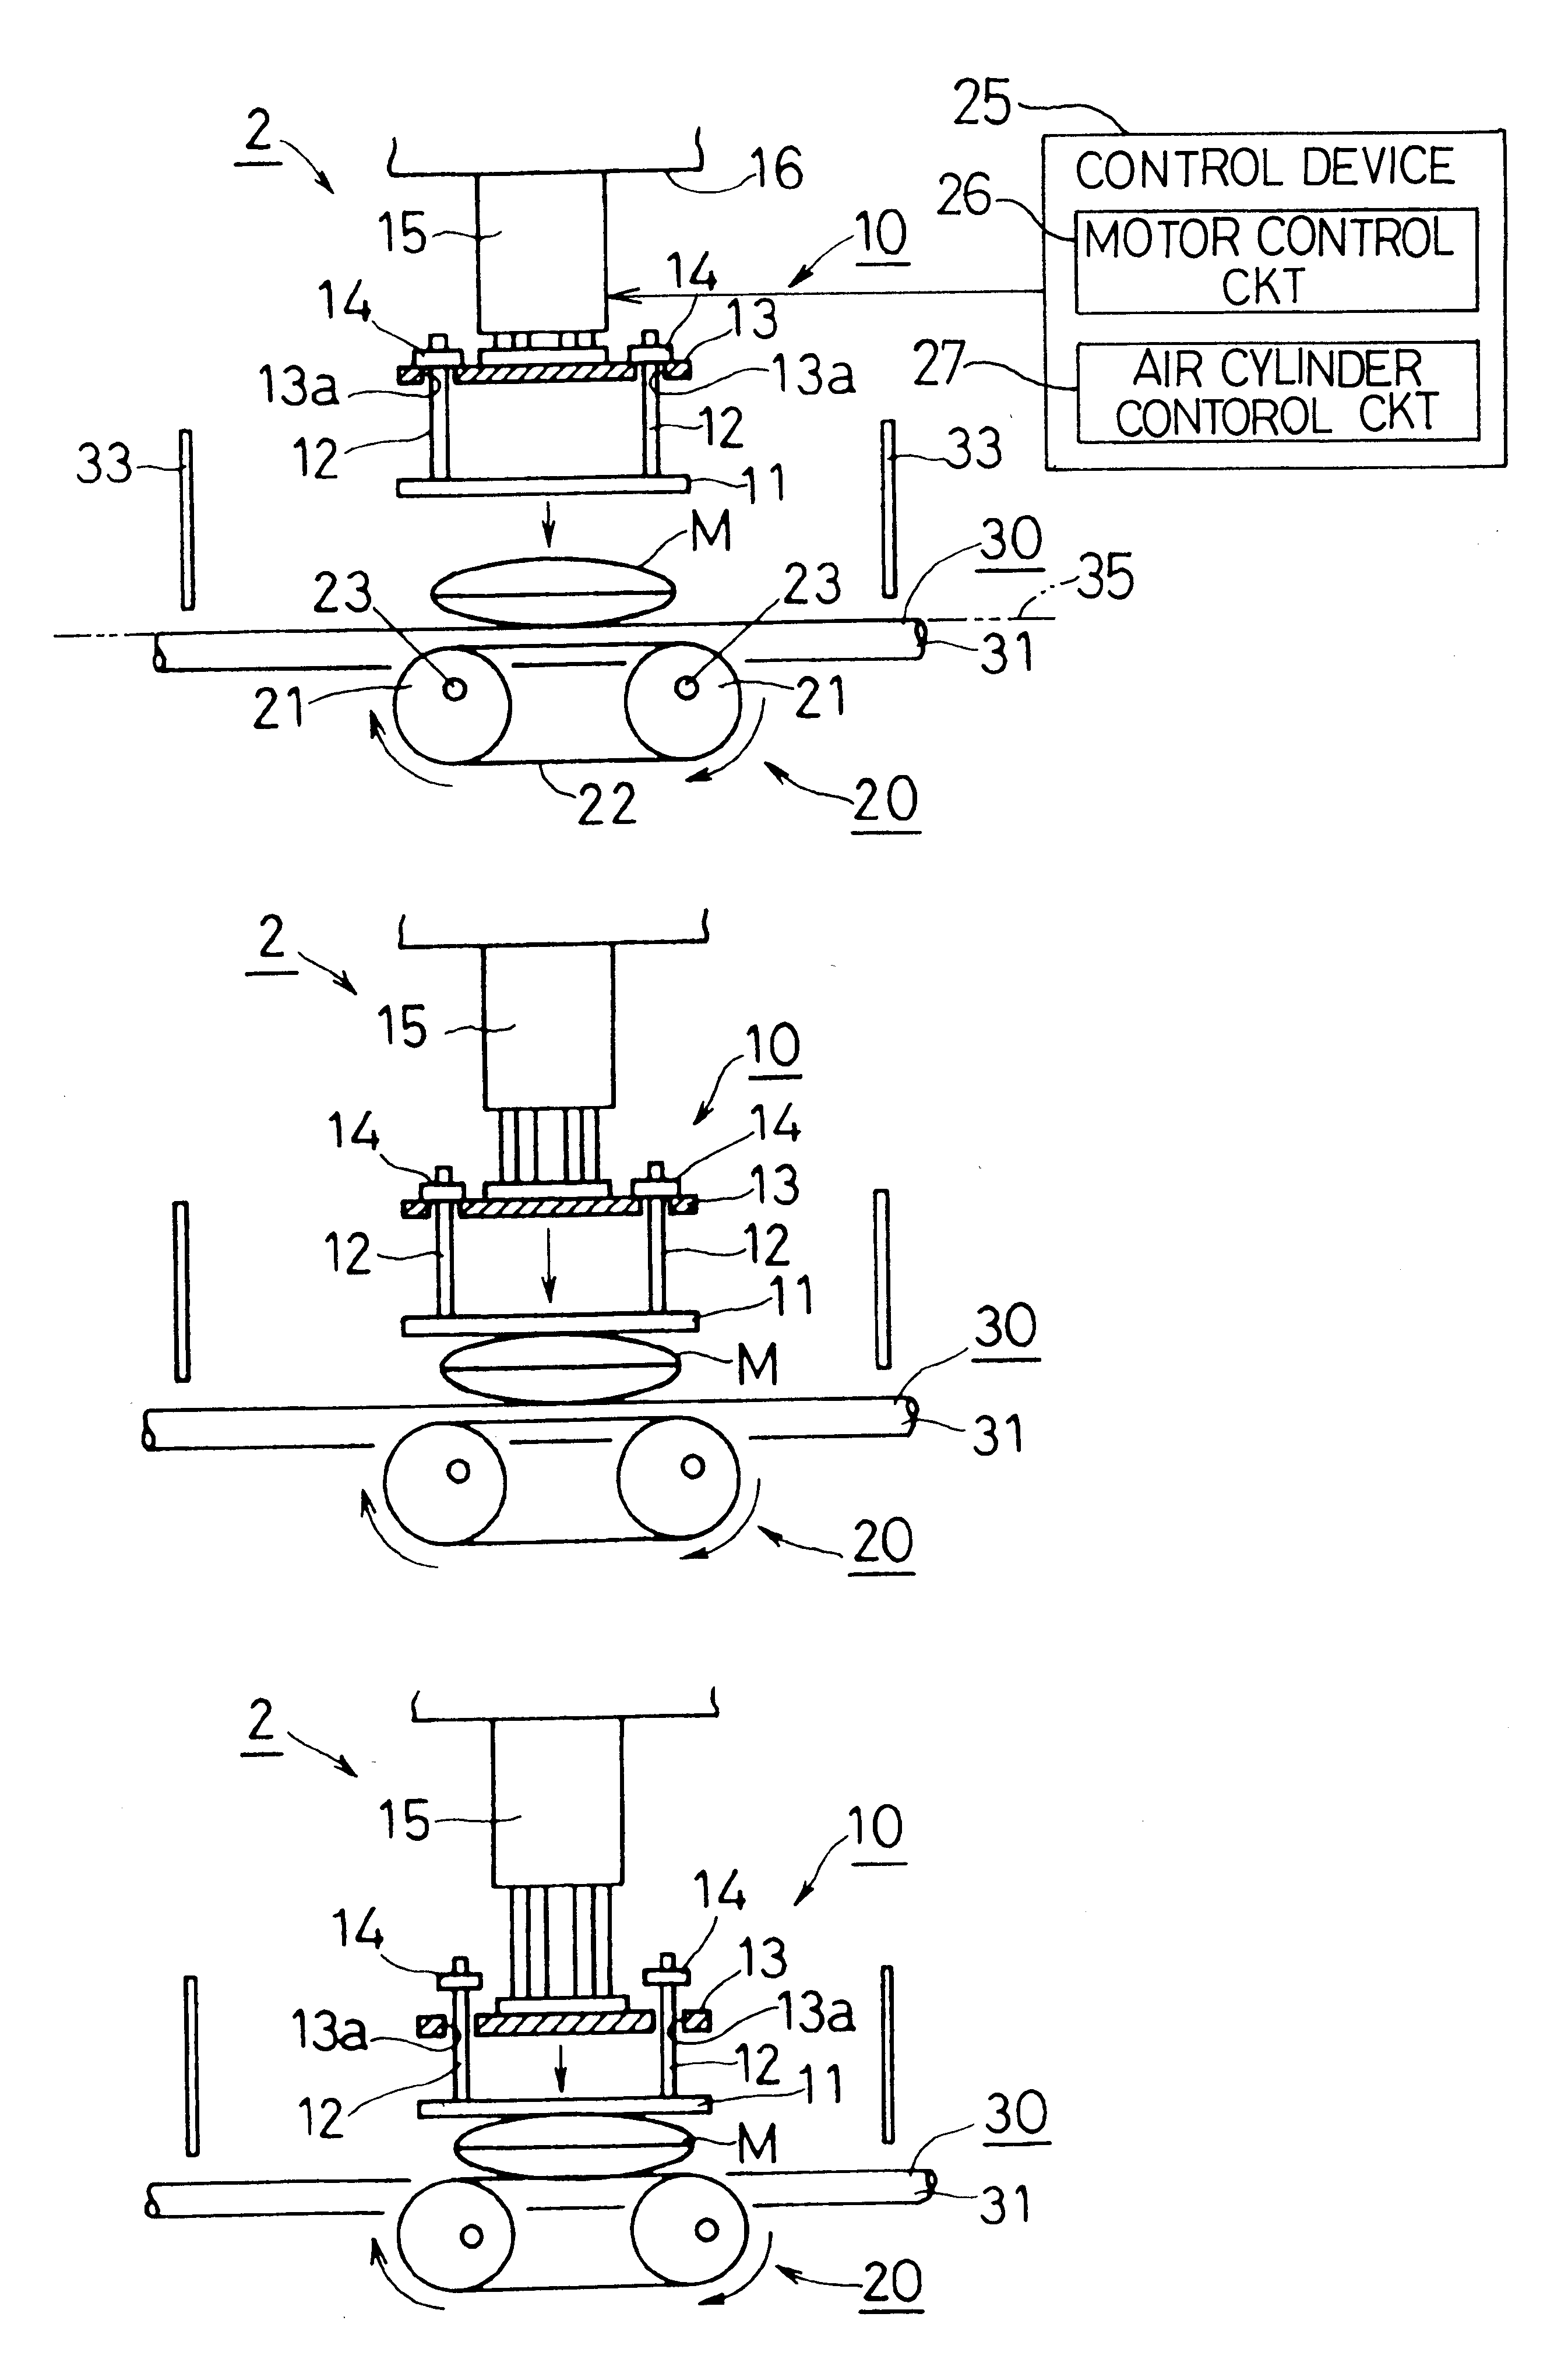 Product diverting mechanism in packaging system